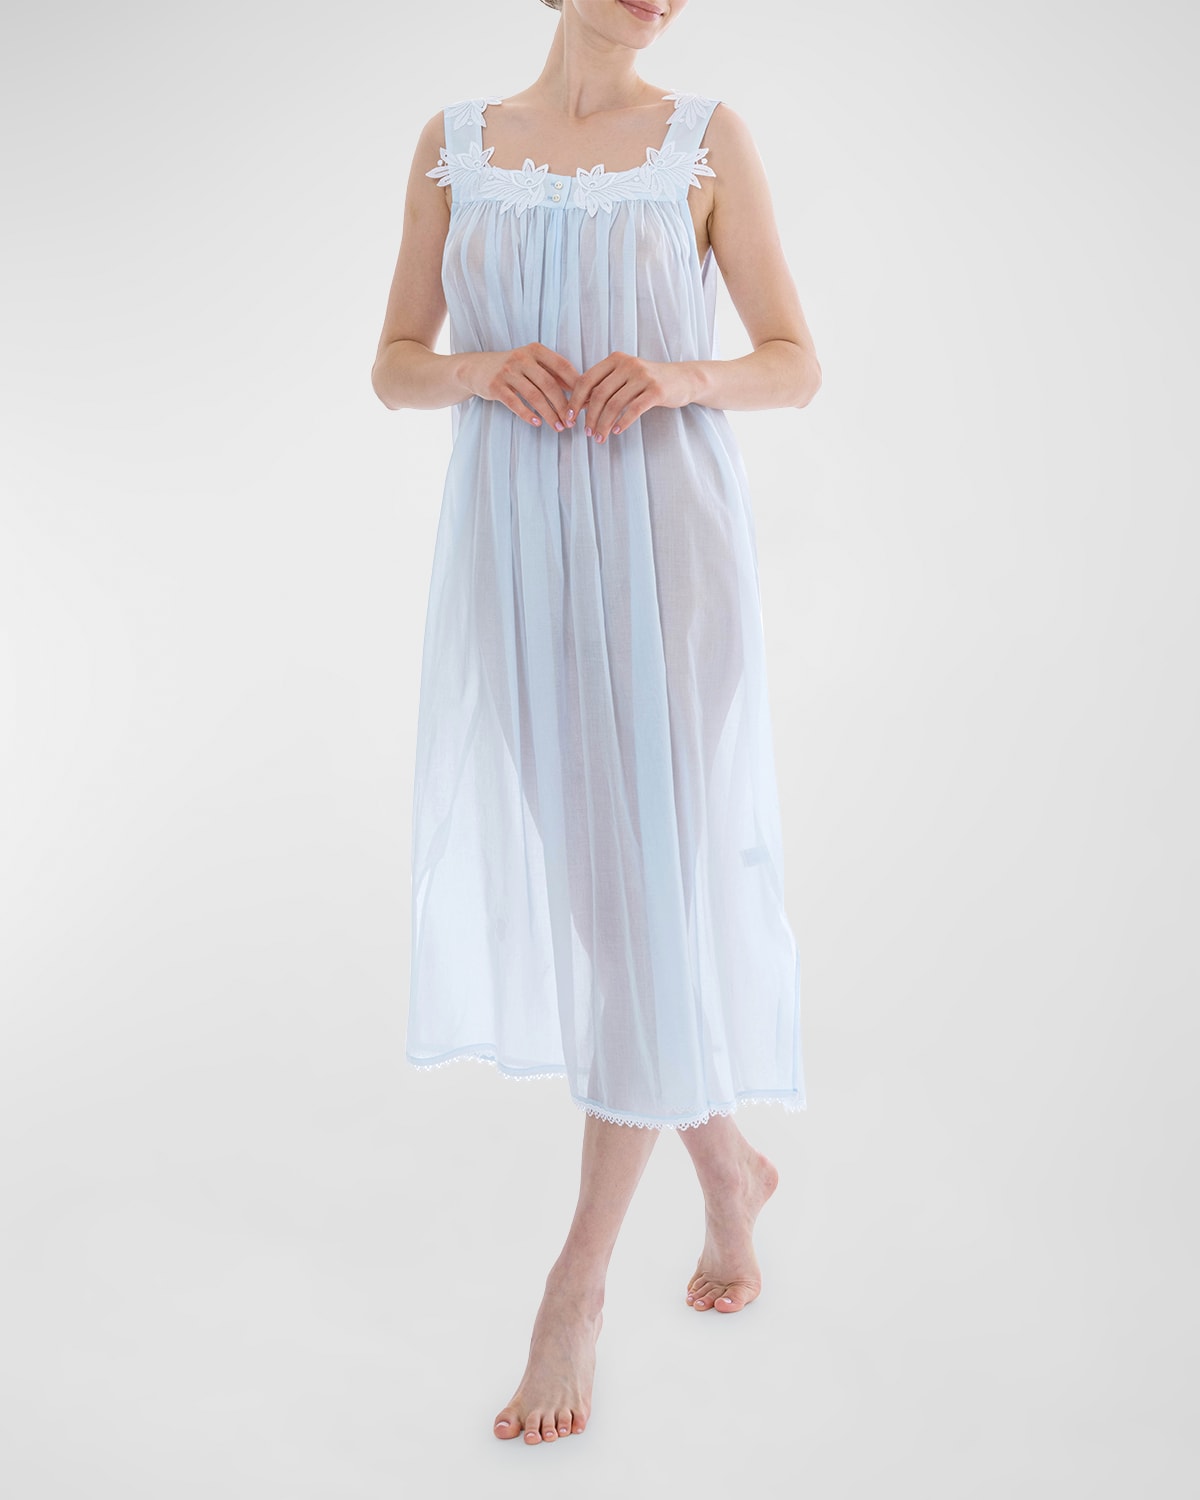 Celestine Florence 1 Ruched Floral Applique Nightgown